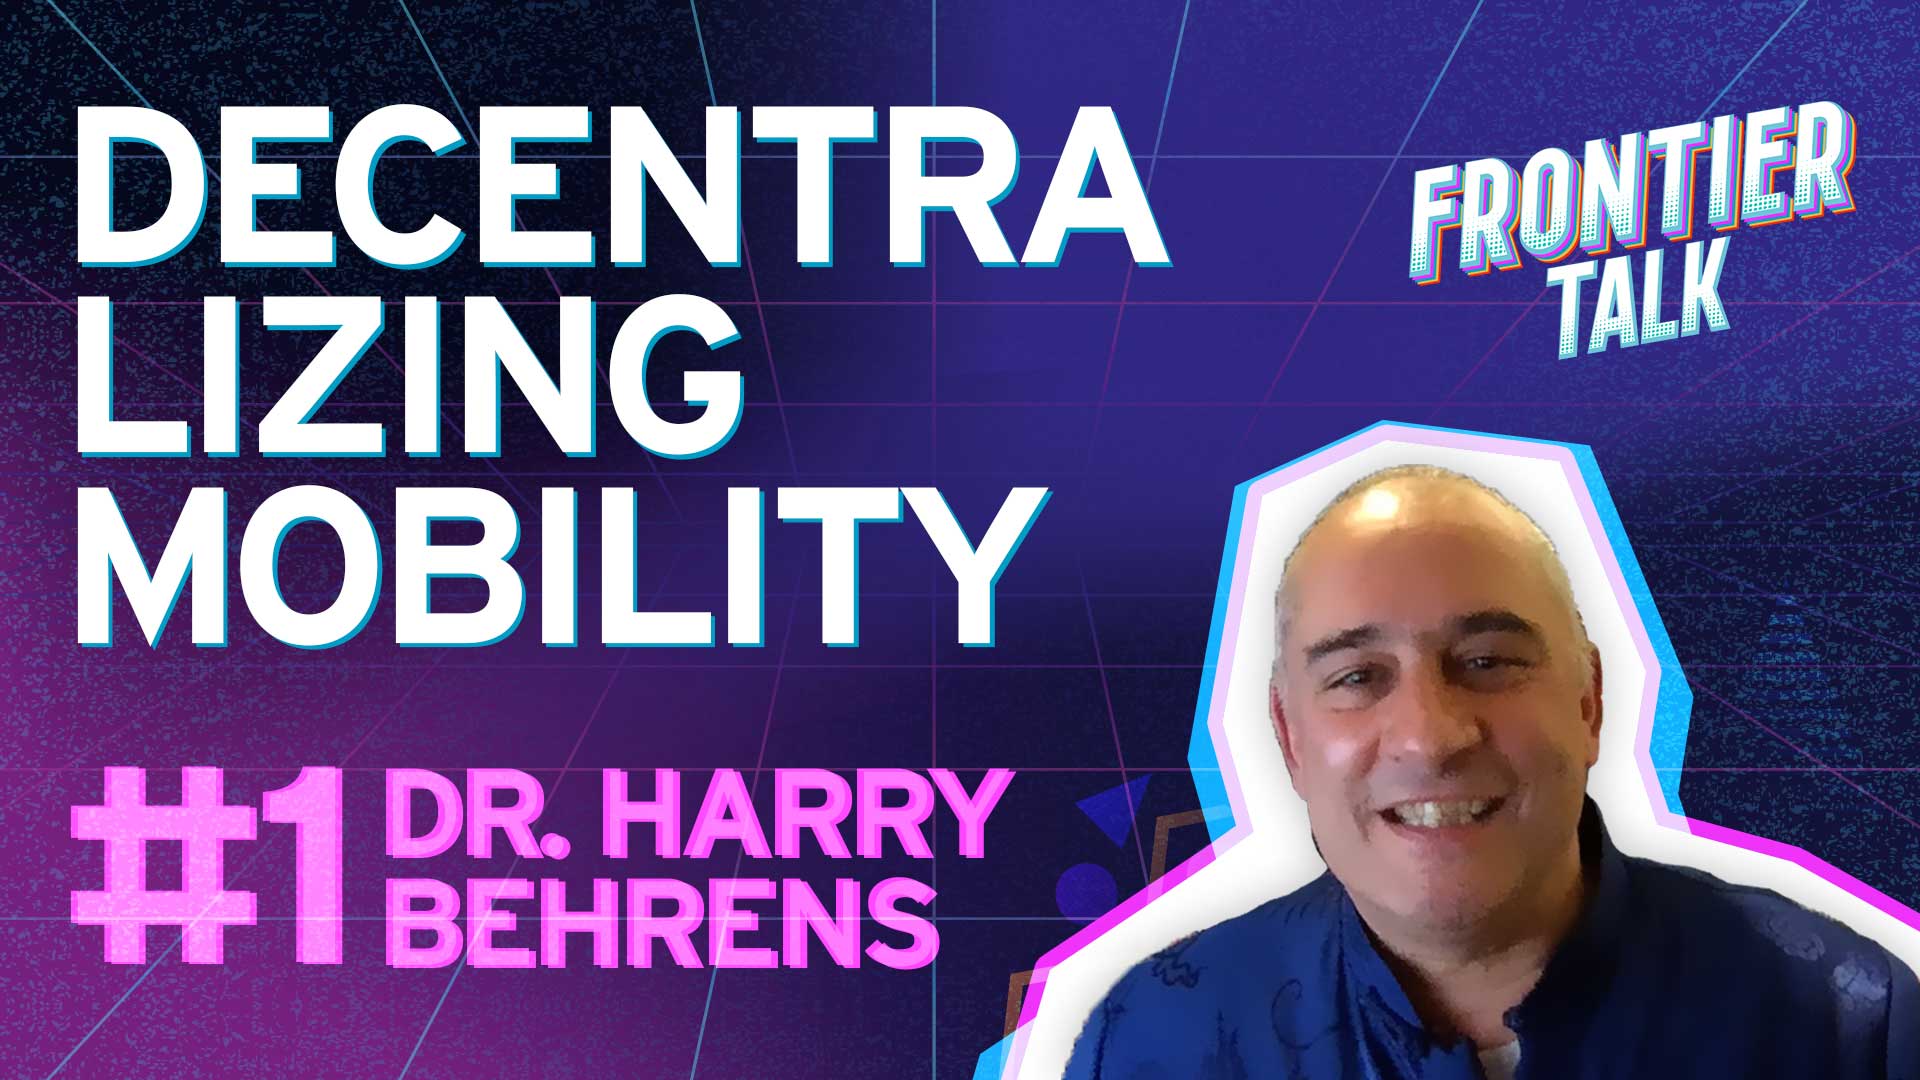 Decentralizing Mobility, Coopetition and Platforms | Frontier Talk #1 - Dr. Harry Behrens